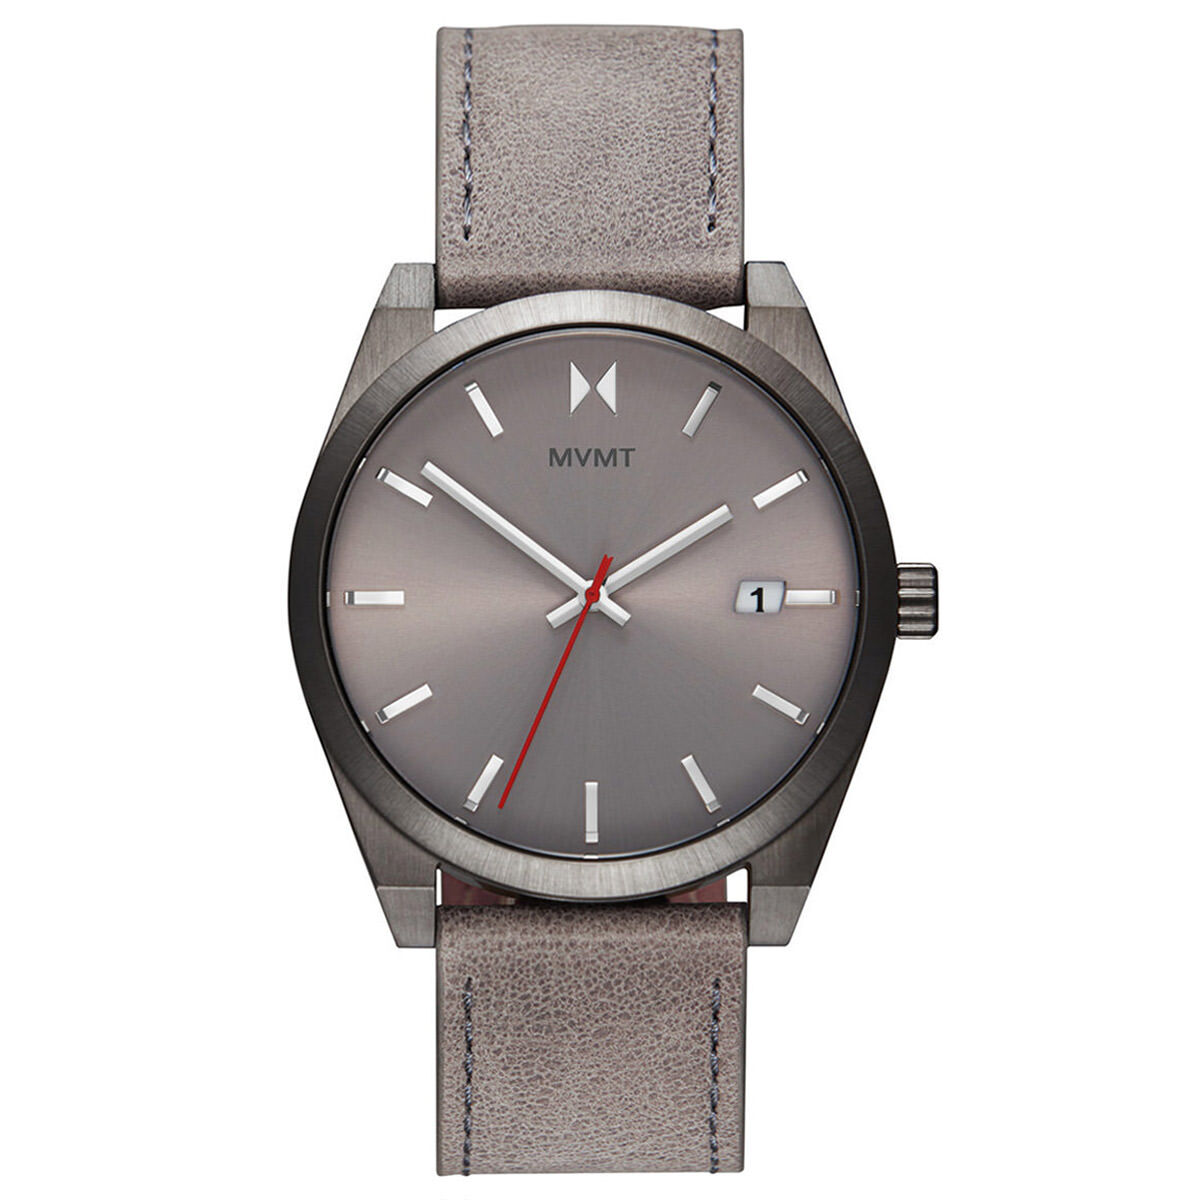 Elements Watch Co | Watches for Men and Women Under $100